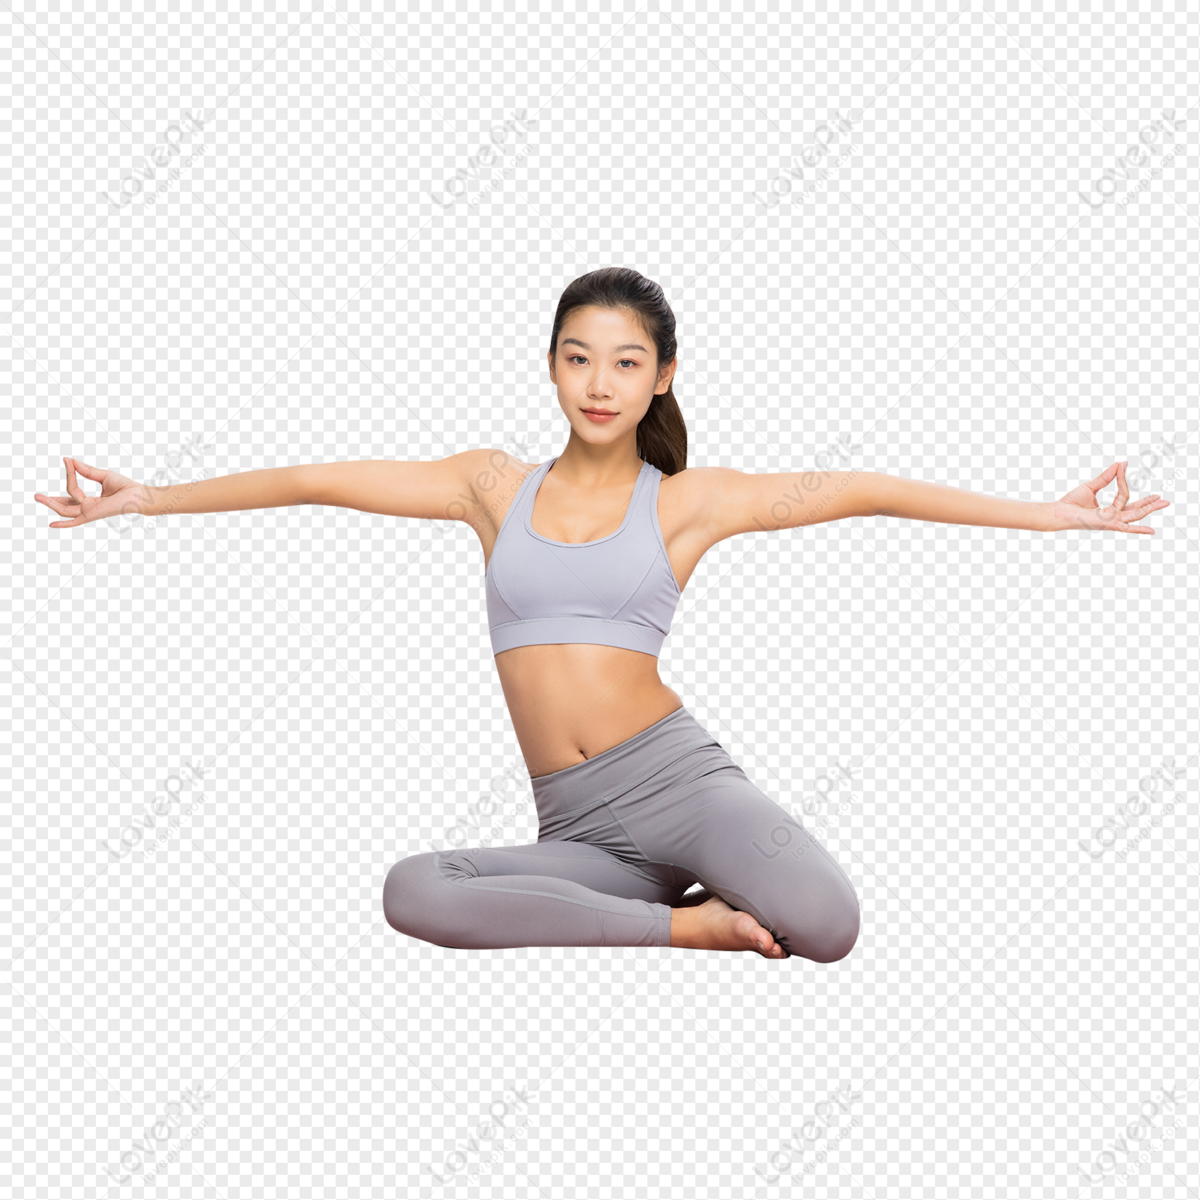 Female Slimming Arm Picture And HD Photos